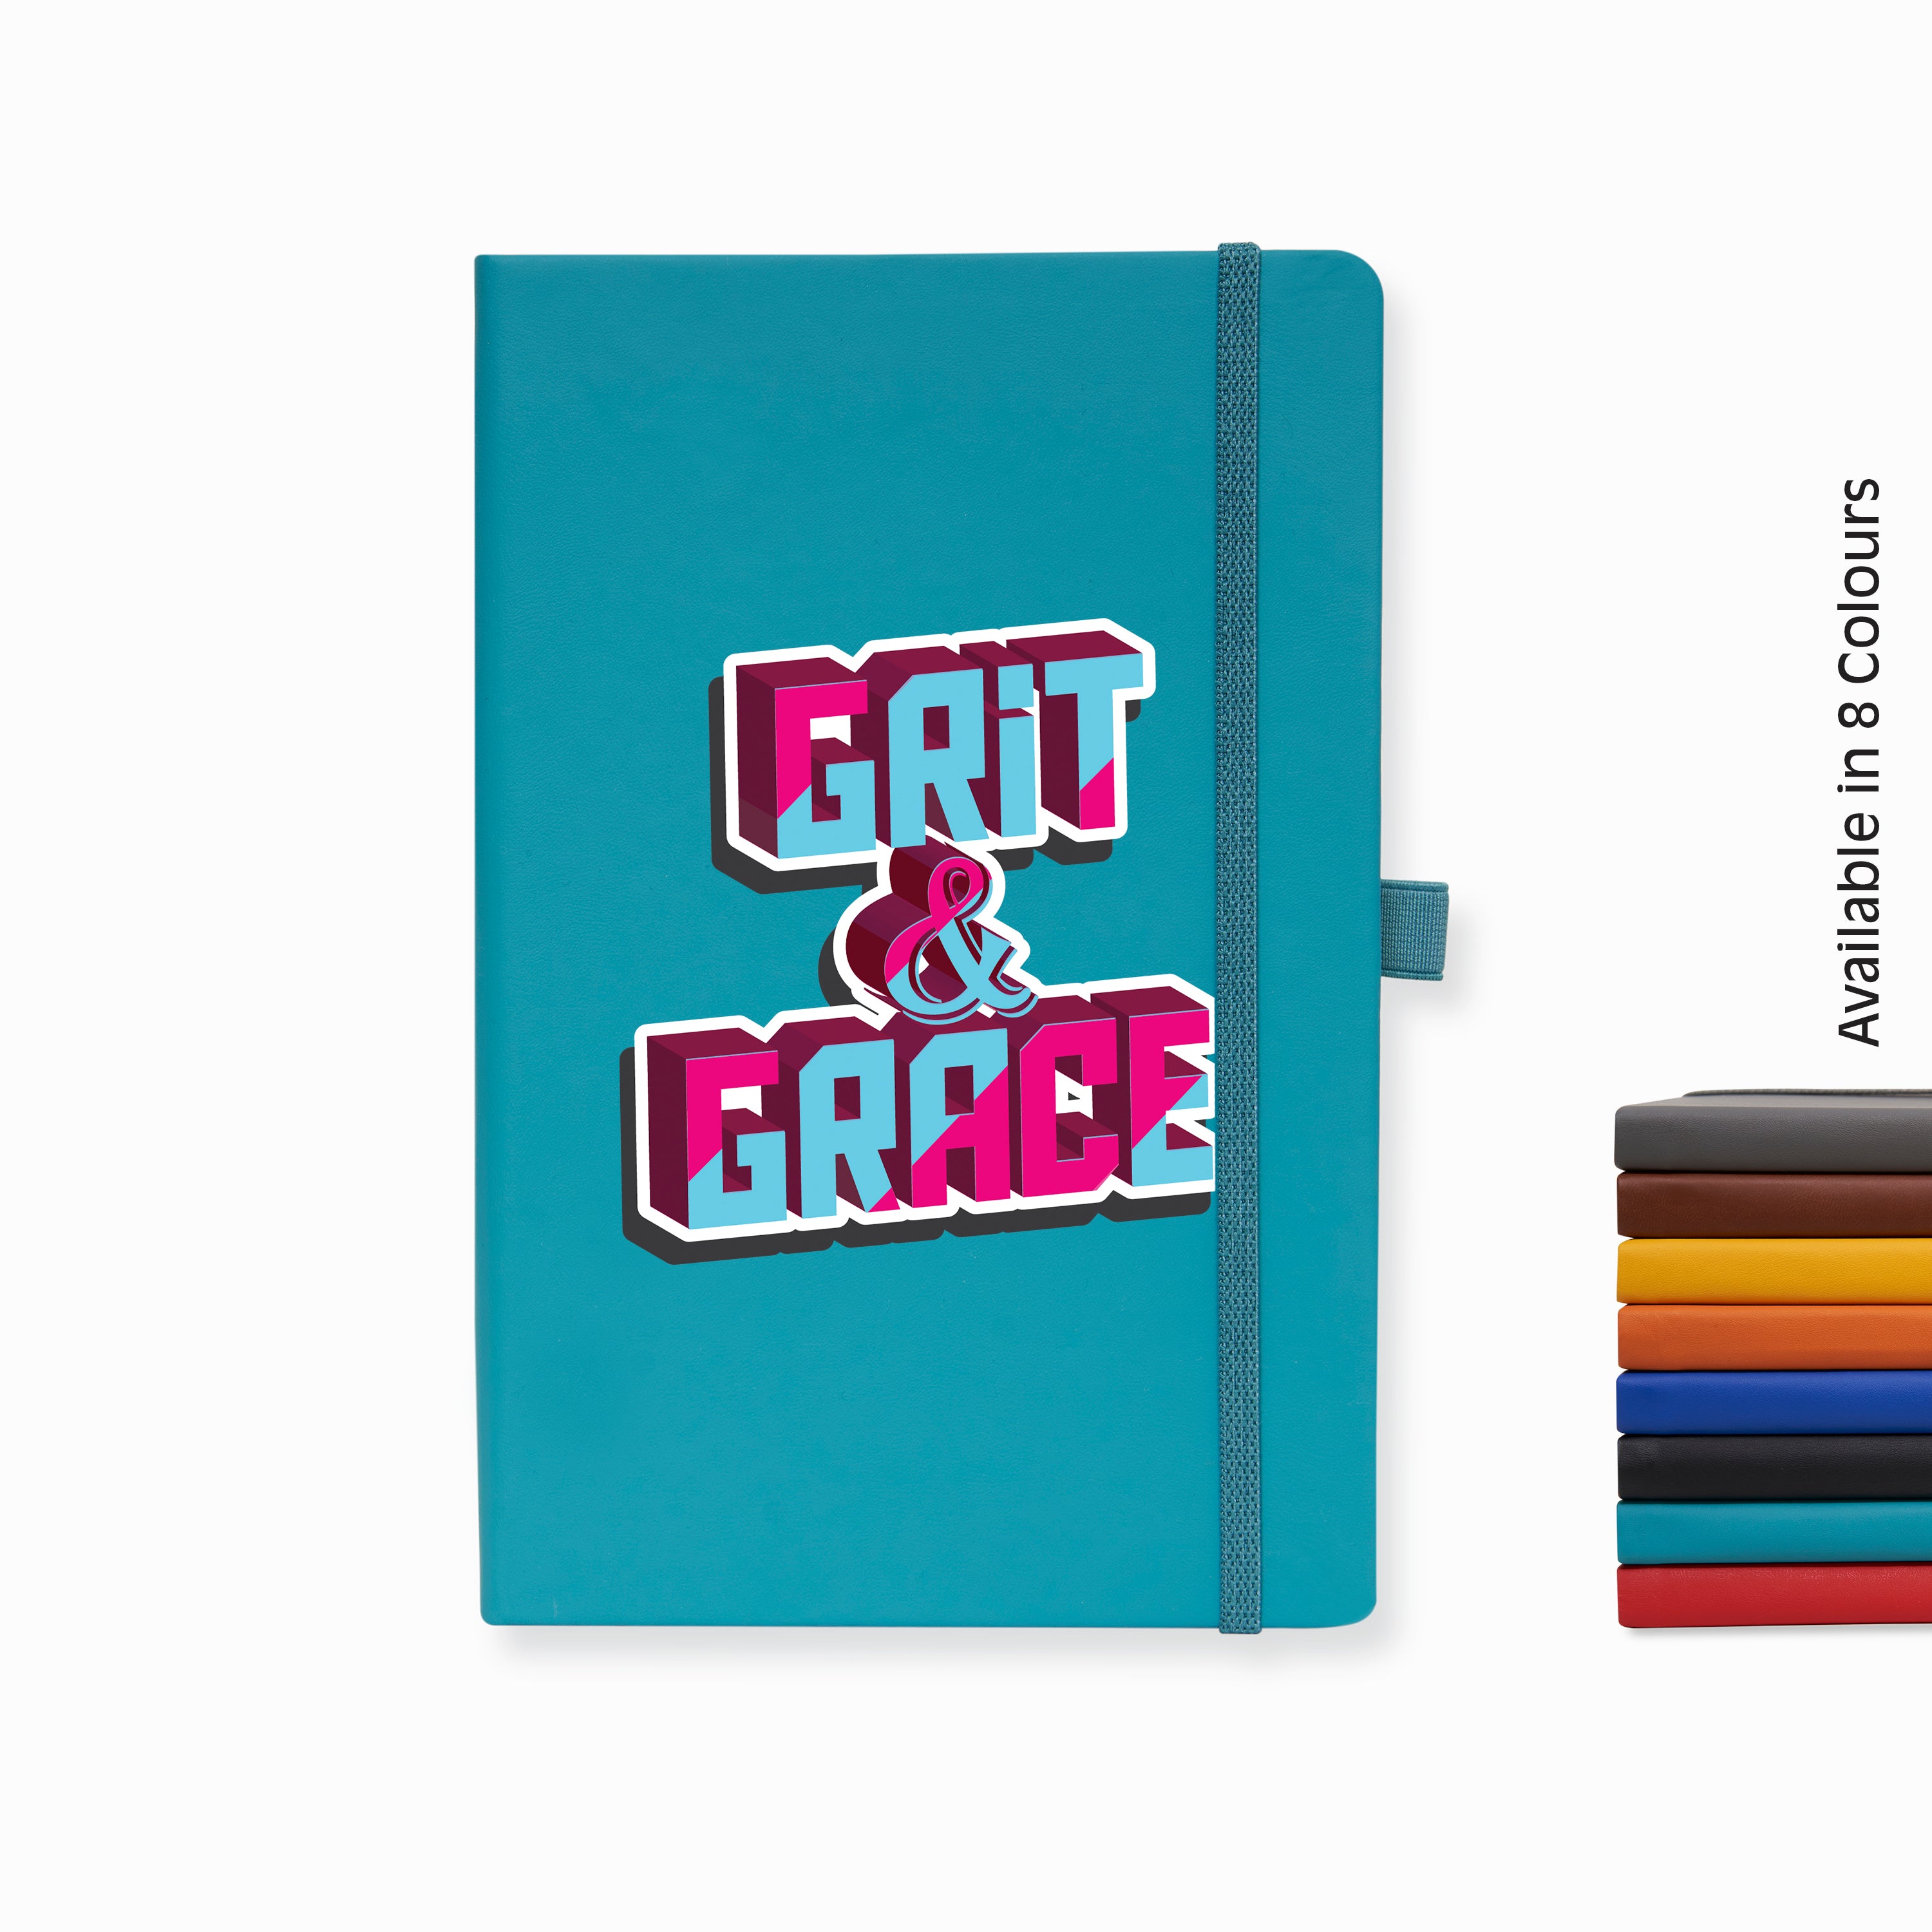 Doodle Pro Series Executive A5 PU Leather Hardbound Ruled Turkish Blue Notebook with Pen Loop [Grit & Grace]